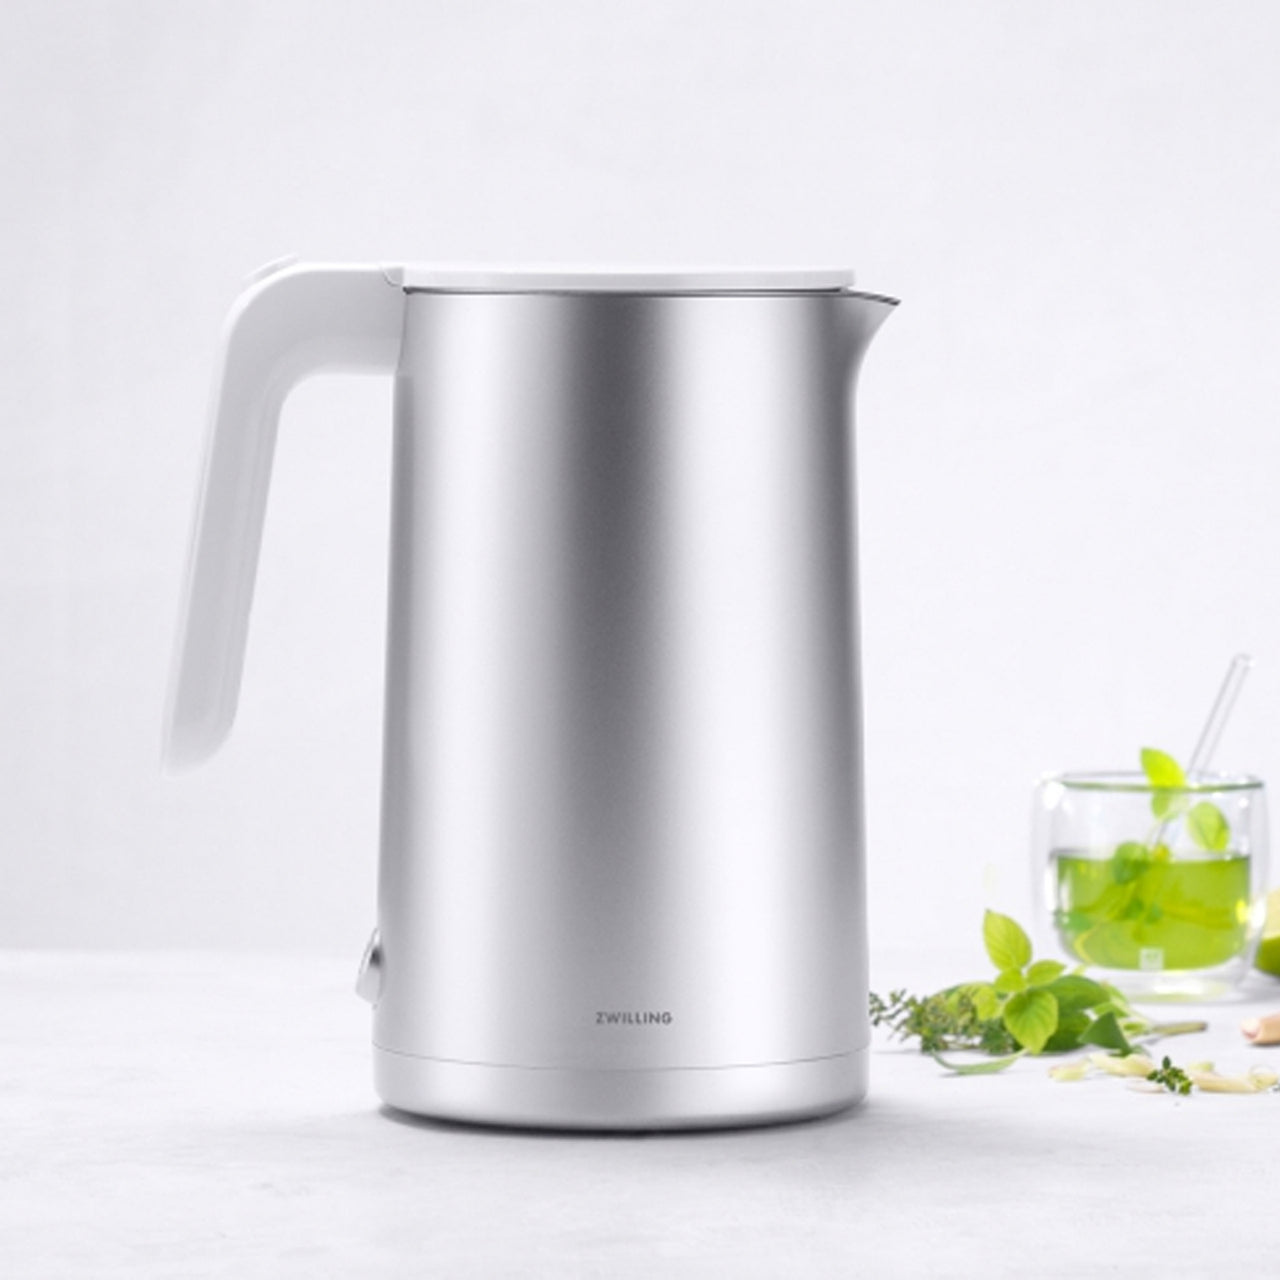 ZWILLING Enfinigy Glass Kettle - Silver